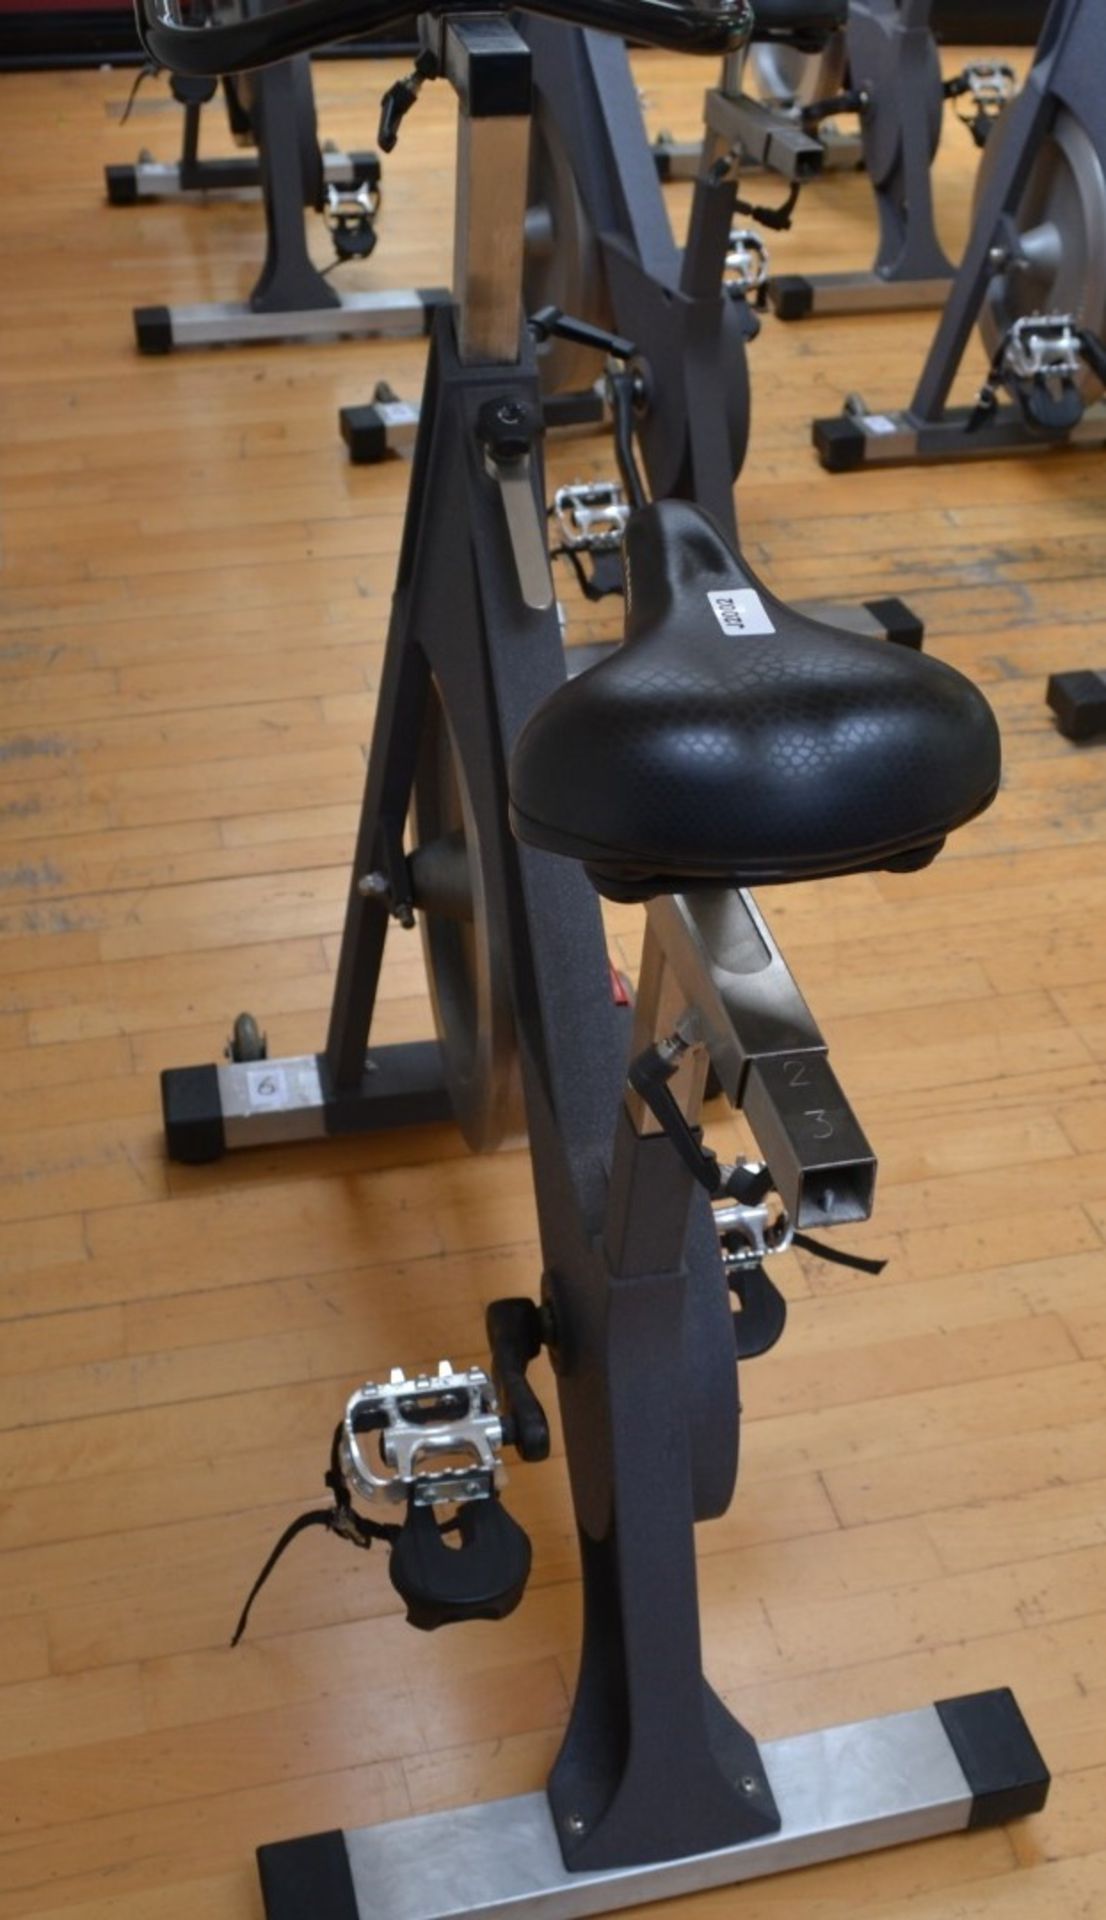 1 x TRUE Indoor Cycling Spin Bike With Adjustable Bars and Seat - Dimensions: L100cm x H100cm - Image 2 of 2